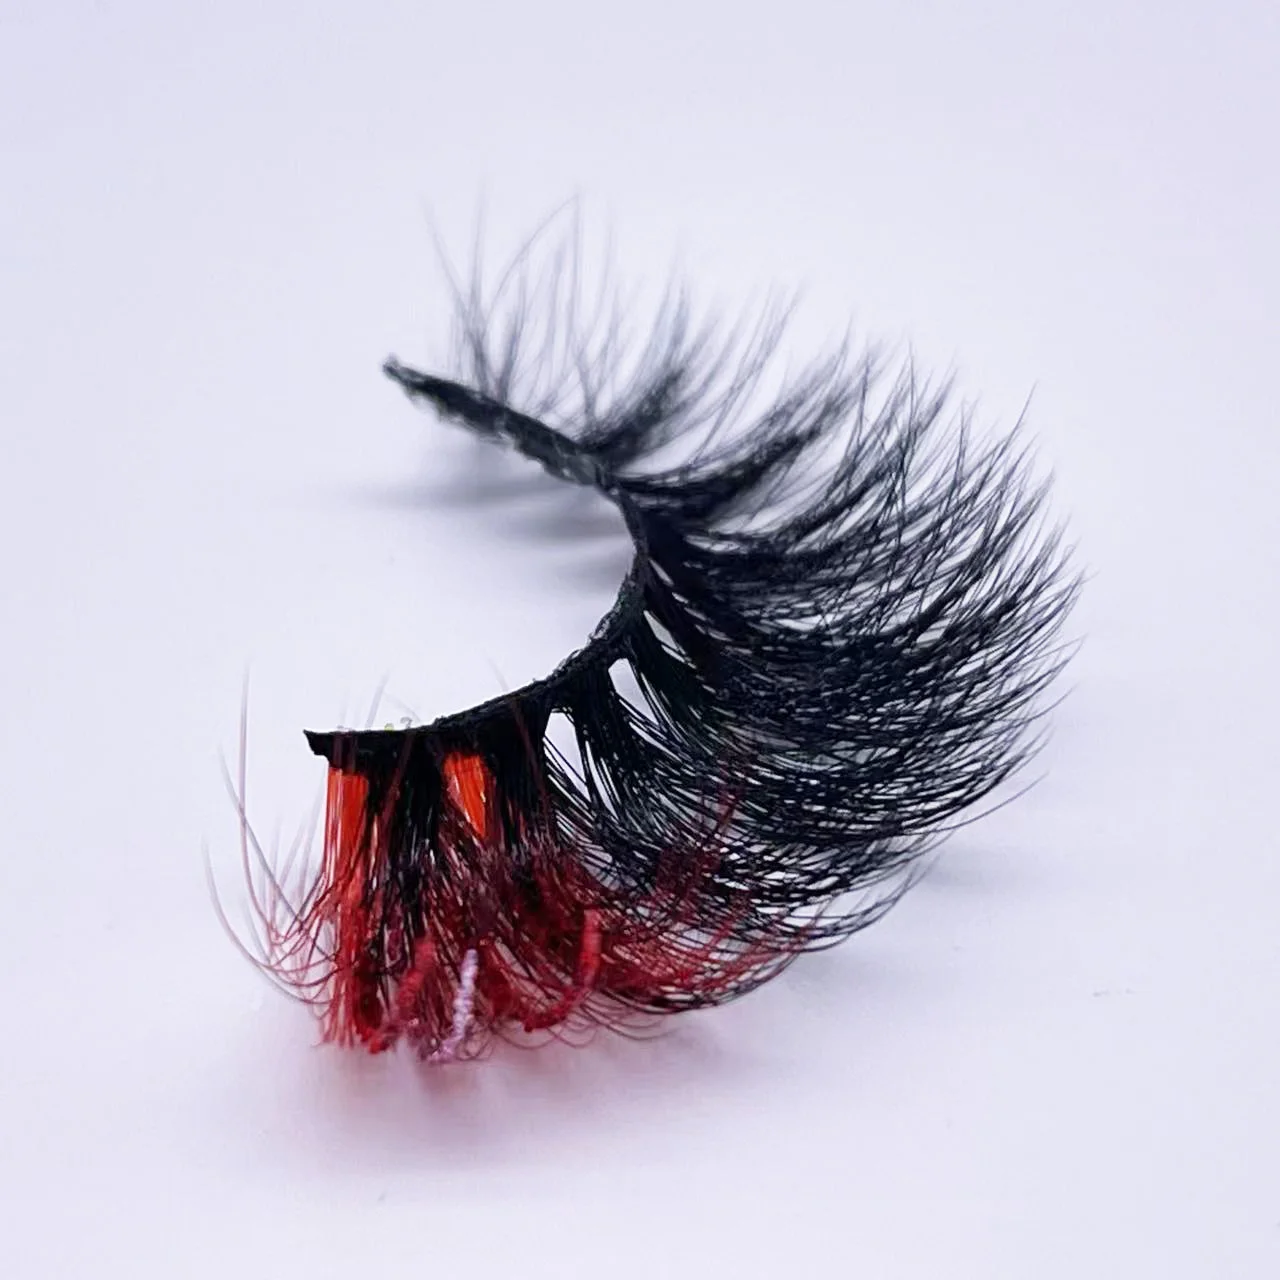 Hbzgtlad Colored Lashes Glitter Mink 15mm -20mm Fluffy Color Streaks Cosplay Makeup Beauty Eyelashes -Outlet Maid Outfit Store Sf1a8817b302741a2b619b9af202dae43J.jpg